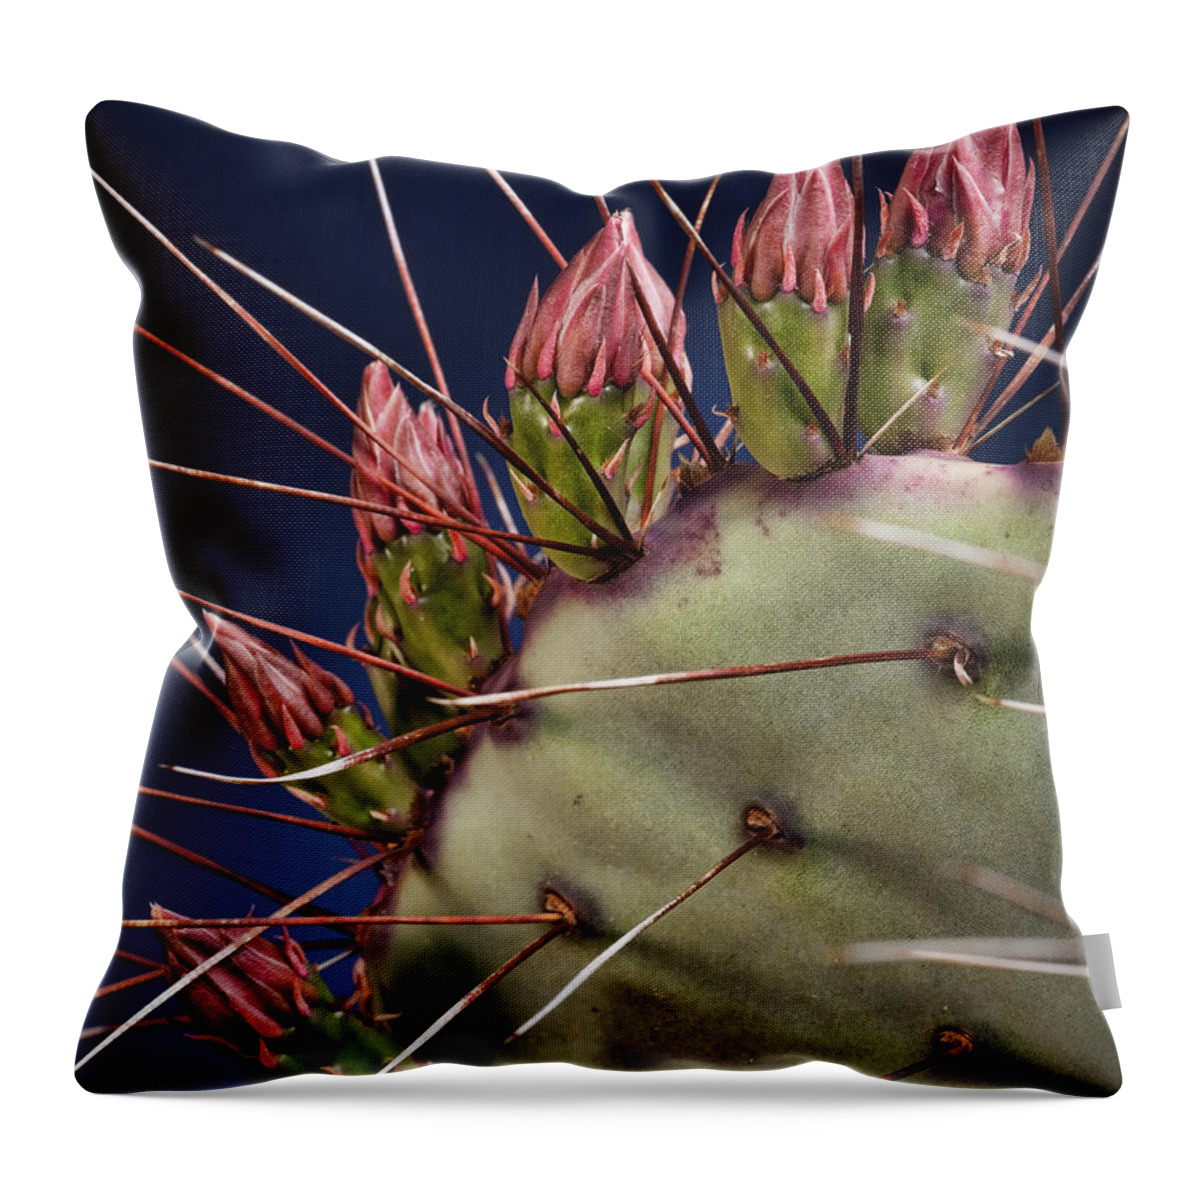 Prickly Pear Throw Pillow featuring the photograph Prickly Buds by Kelley King